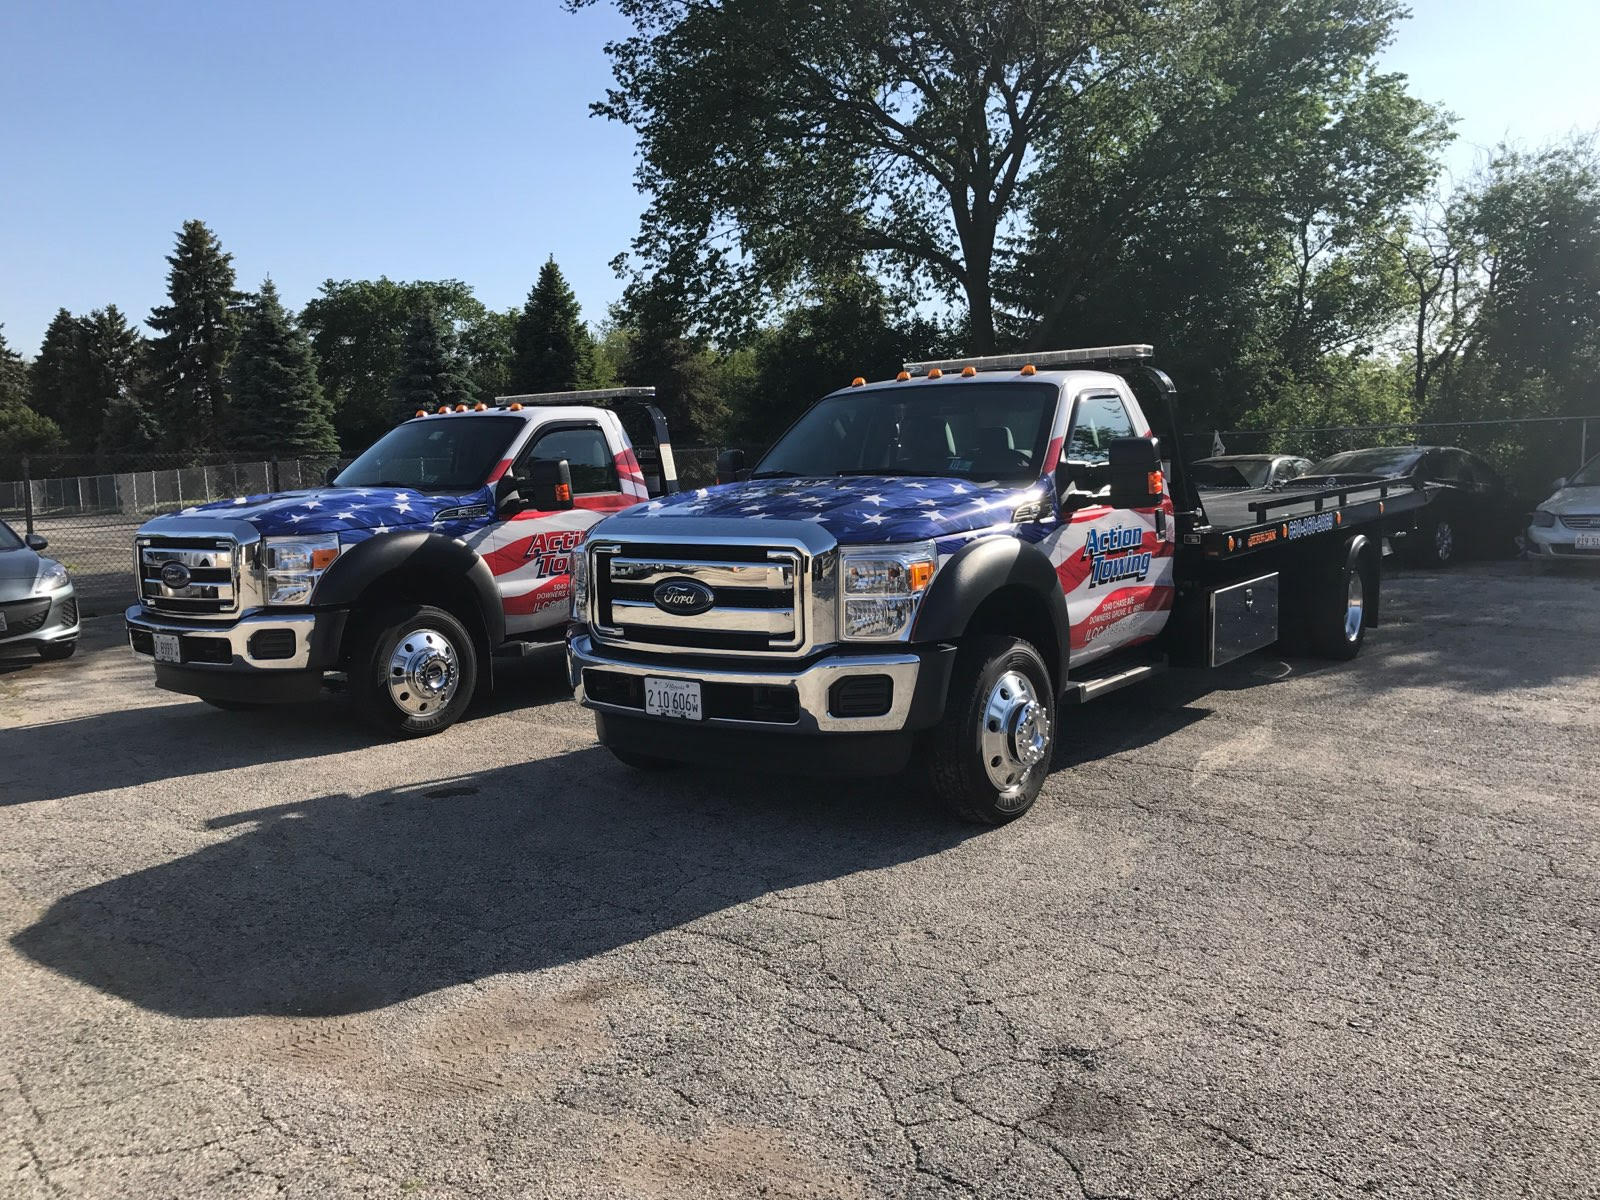 Action Towing Inc. Photo